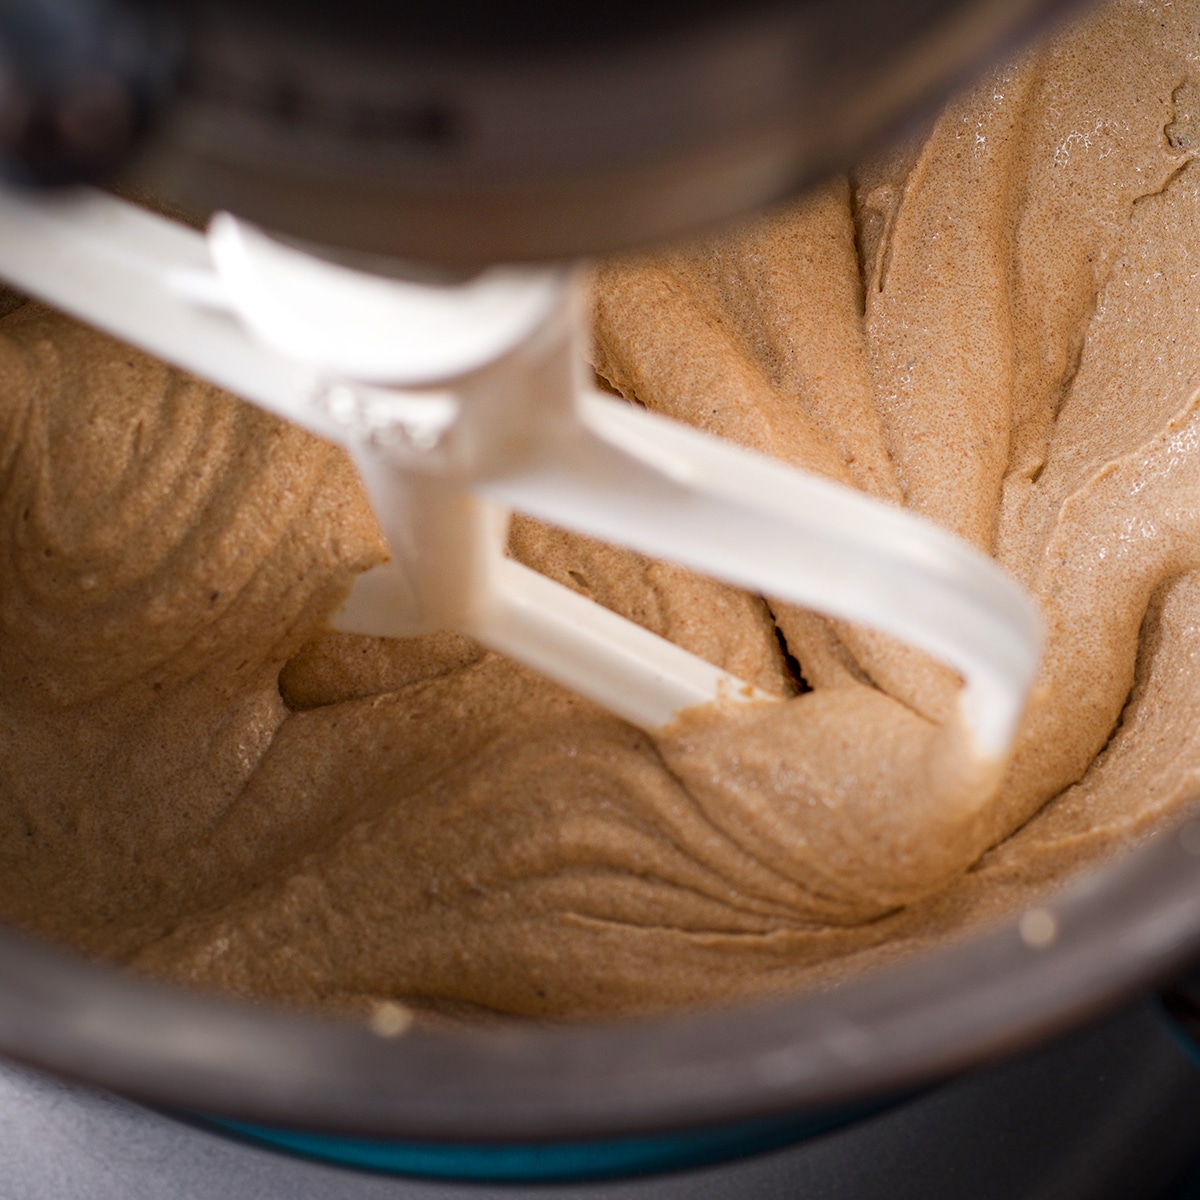 A stand mixer beating butter and sugar.